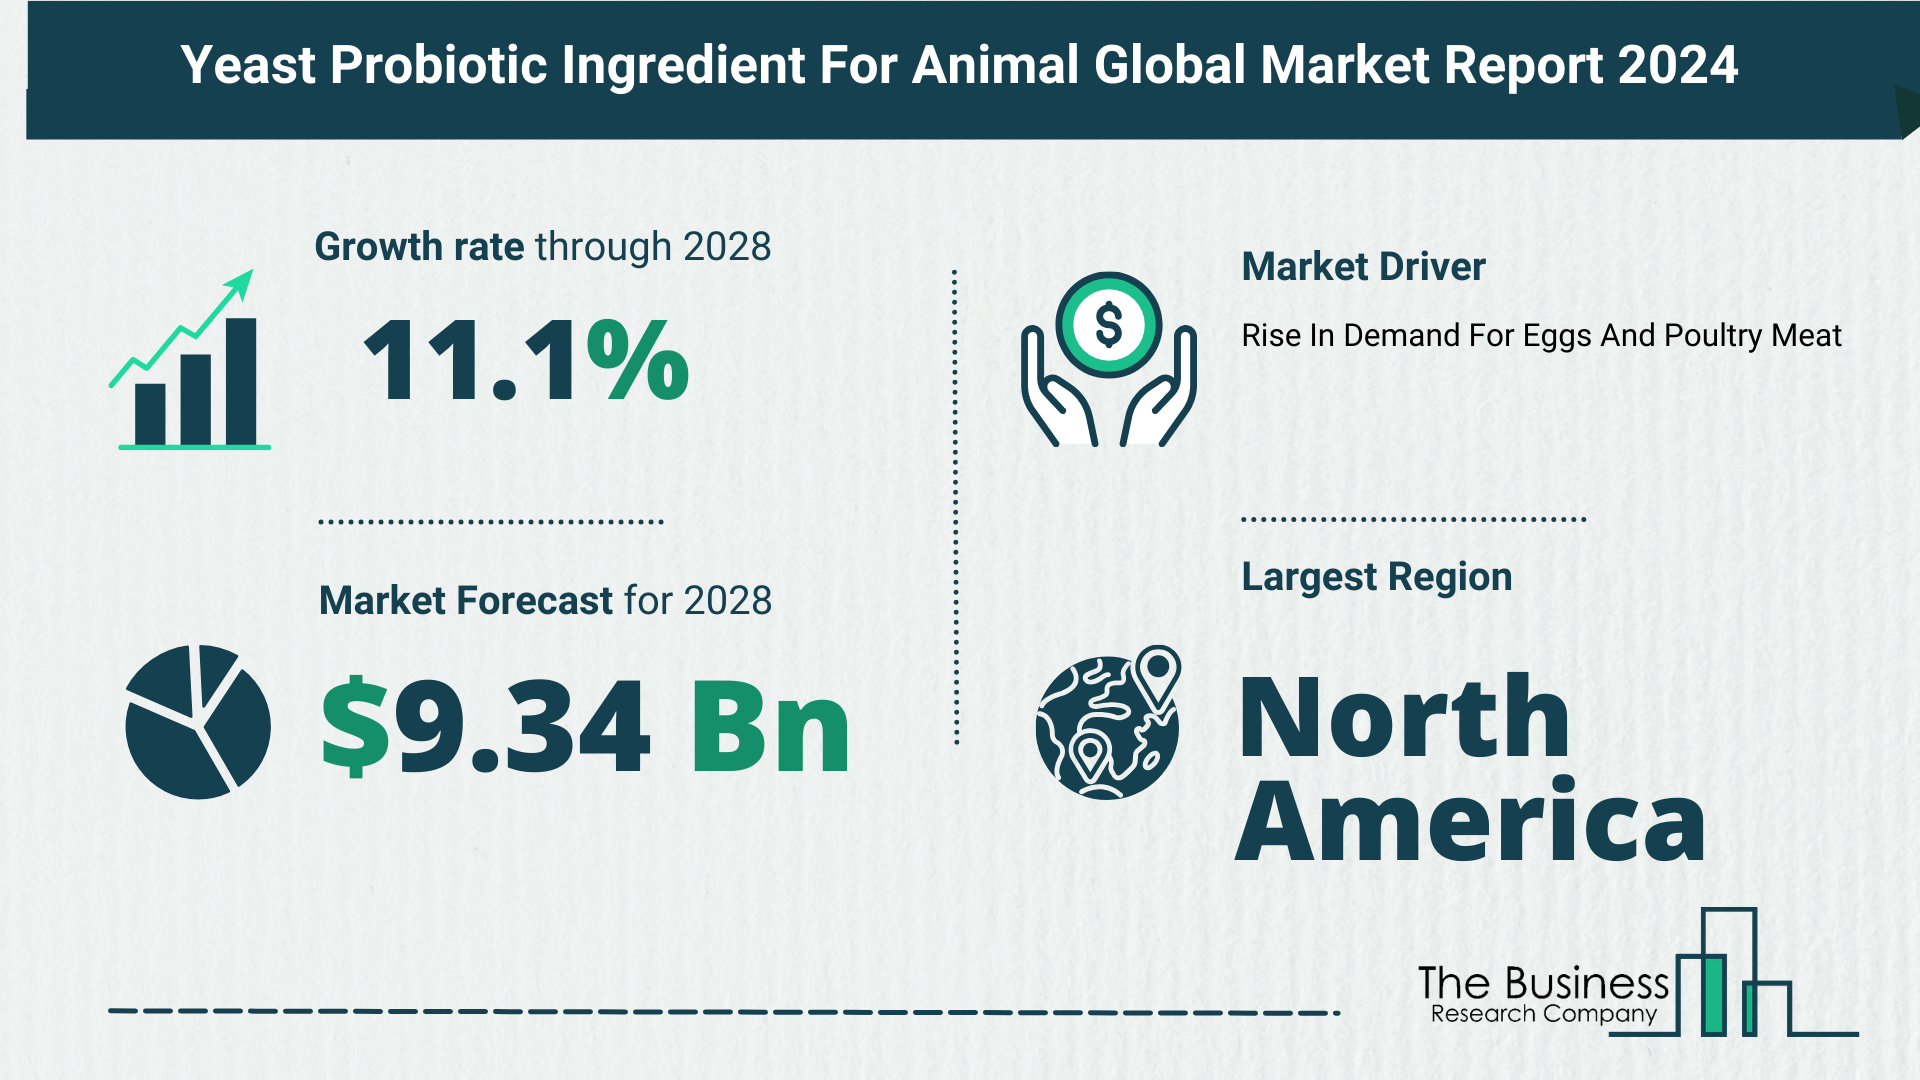 How Is The Yeast Probiotic Ingredient For Animal Market Expected To Grow Through 2024-2033